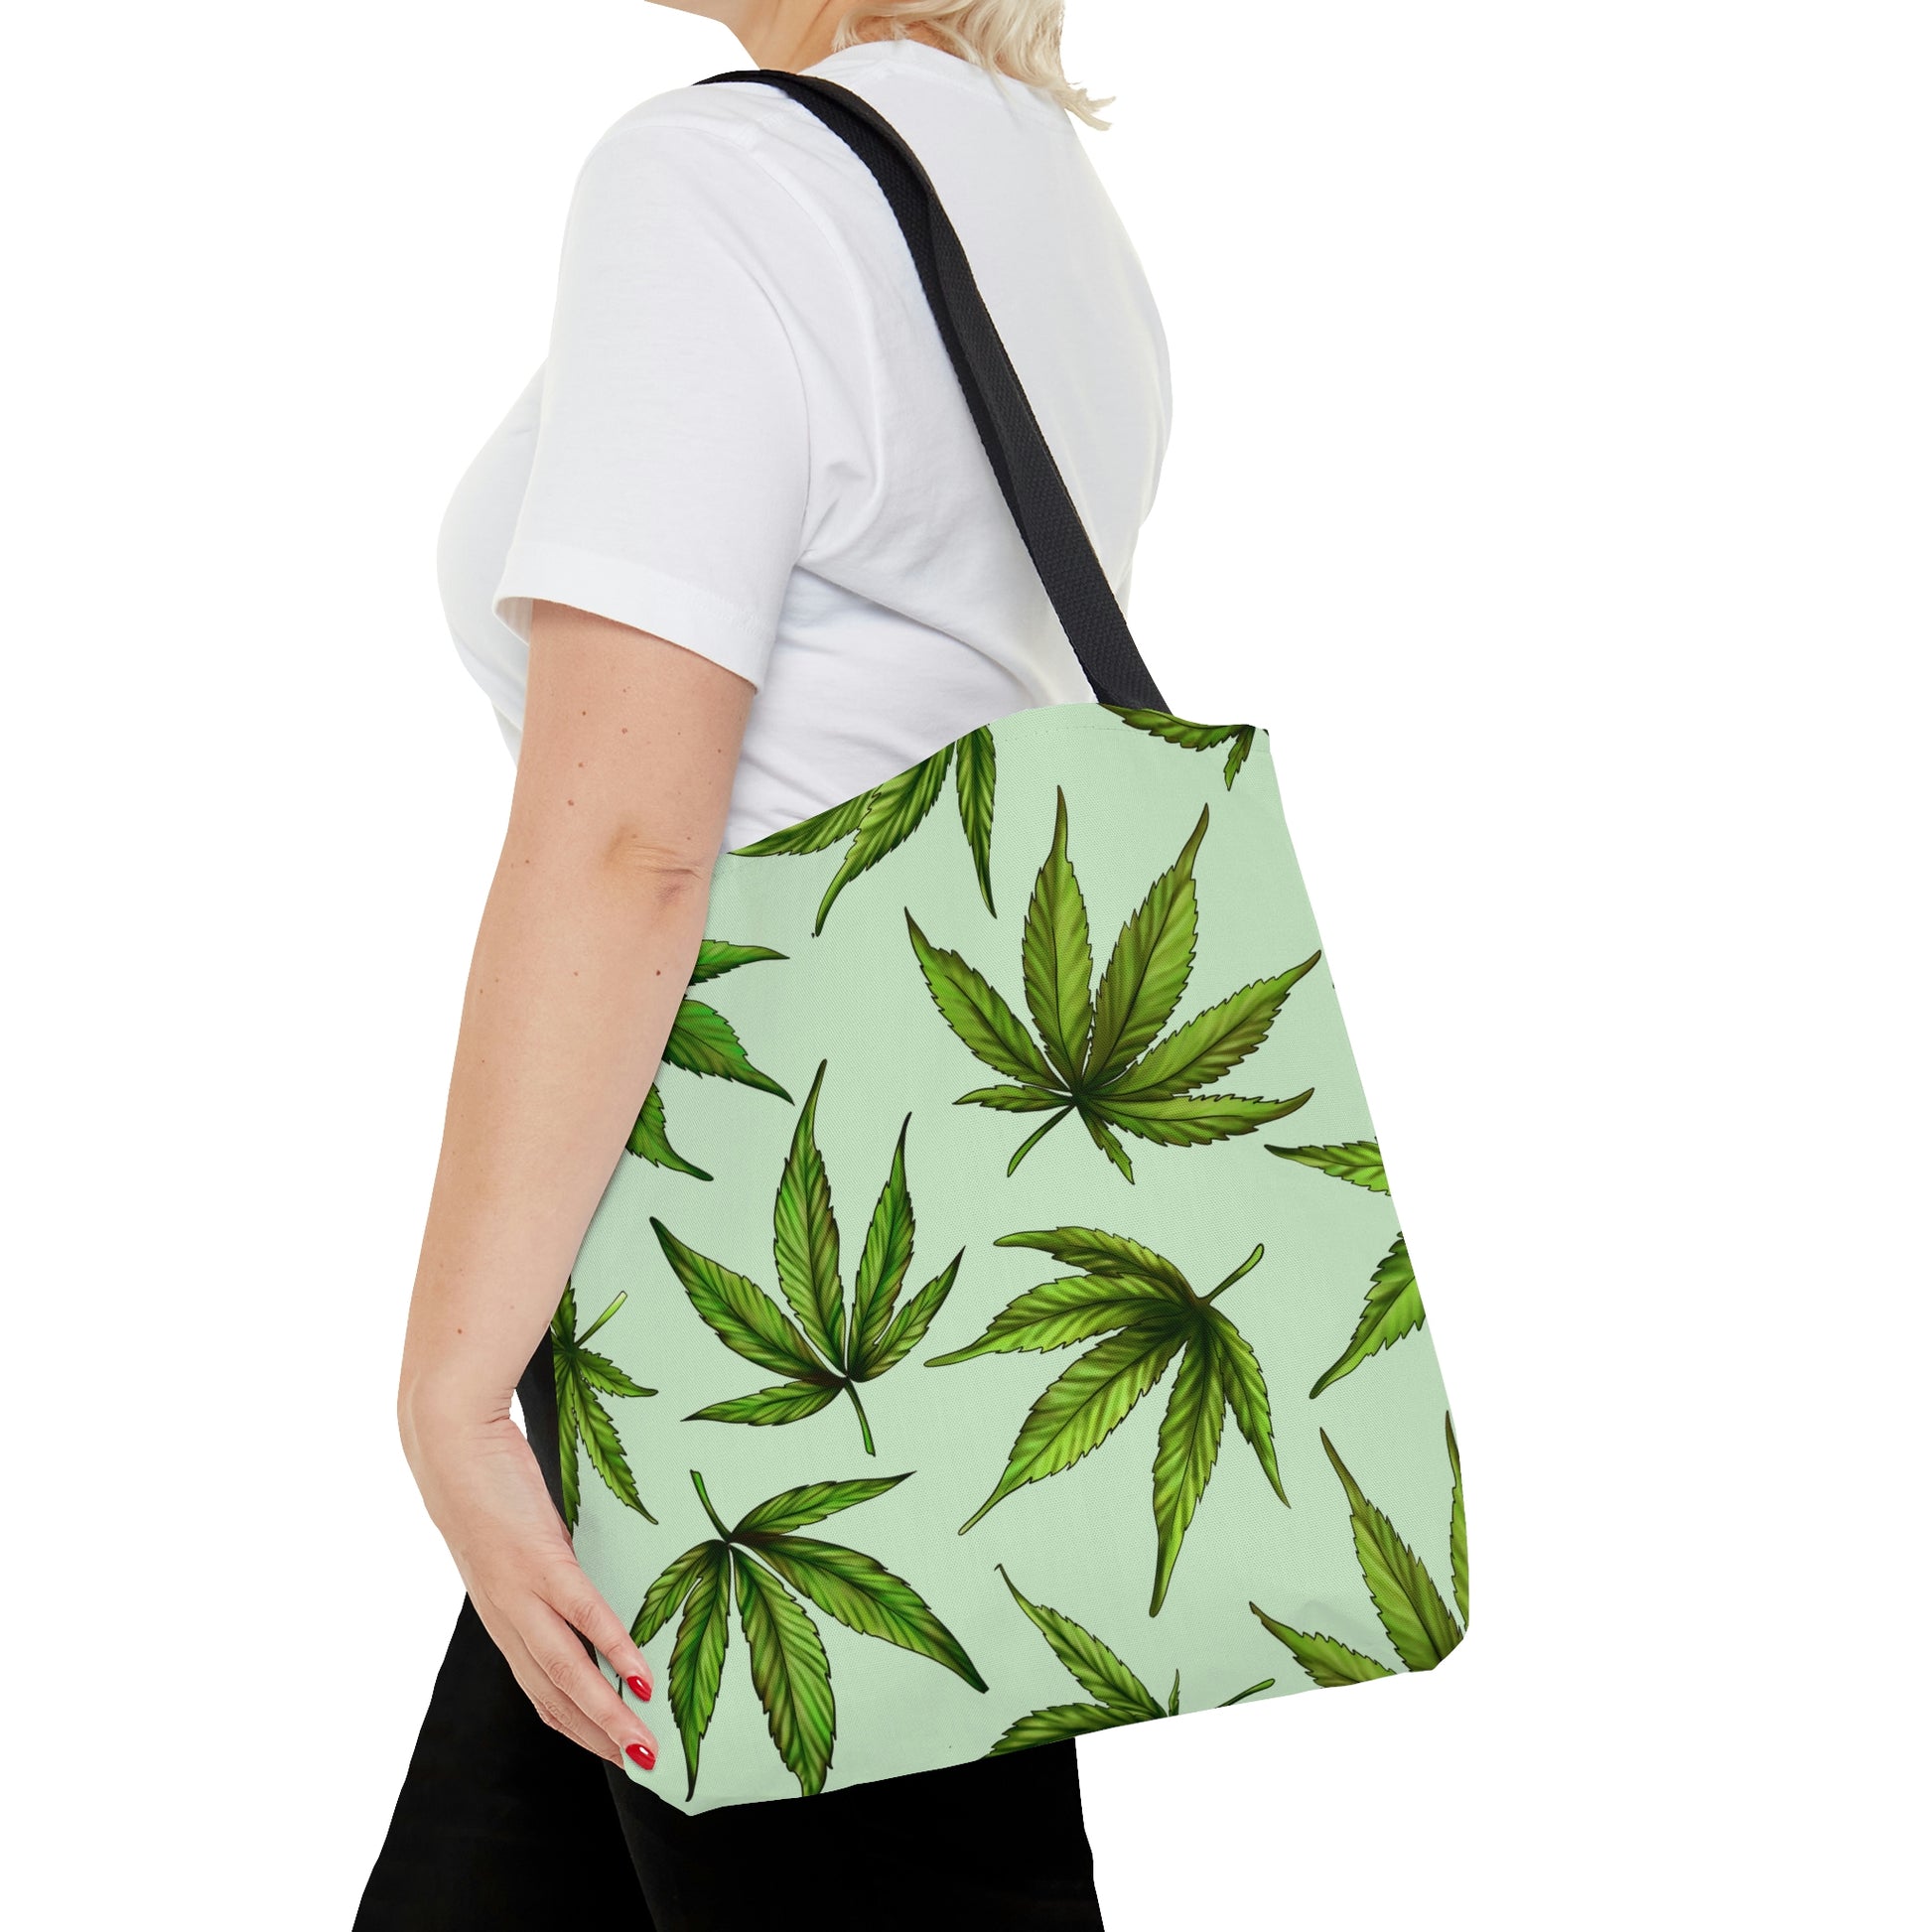 A woman is on her way as she wears the Marijuana Leaves Green Tote Bag